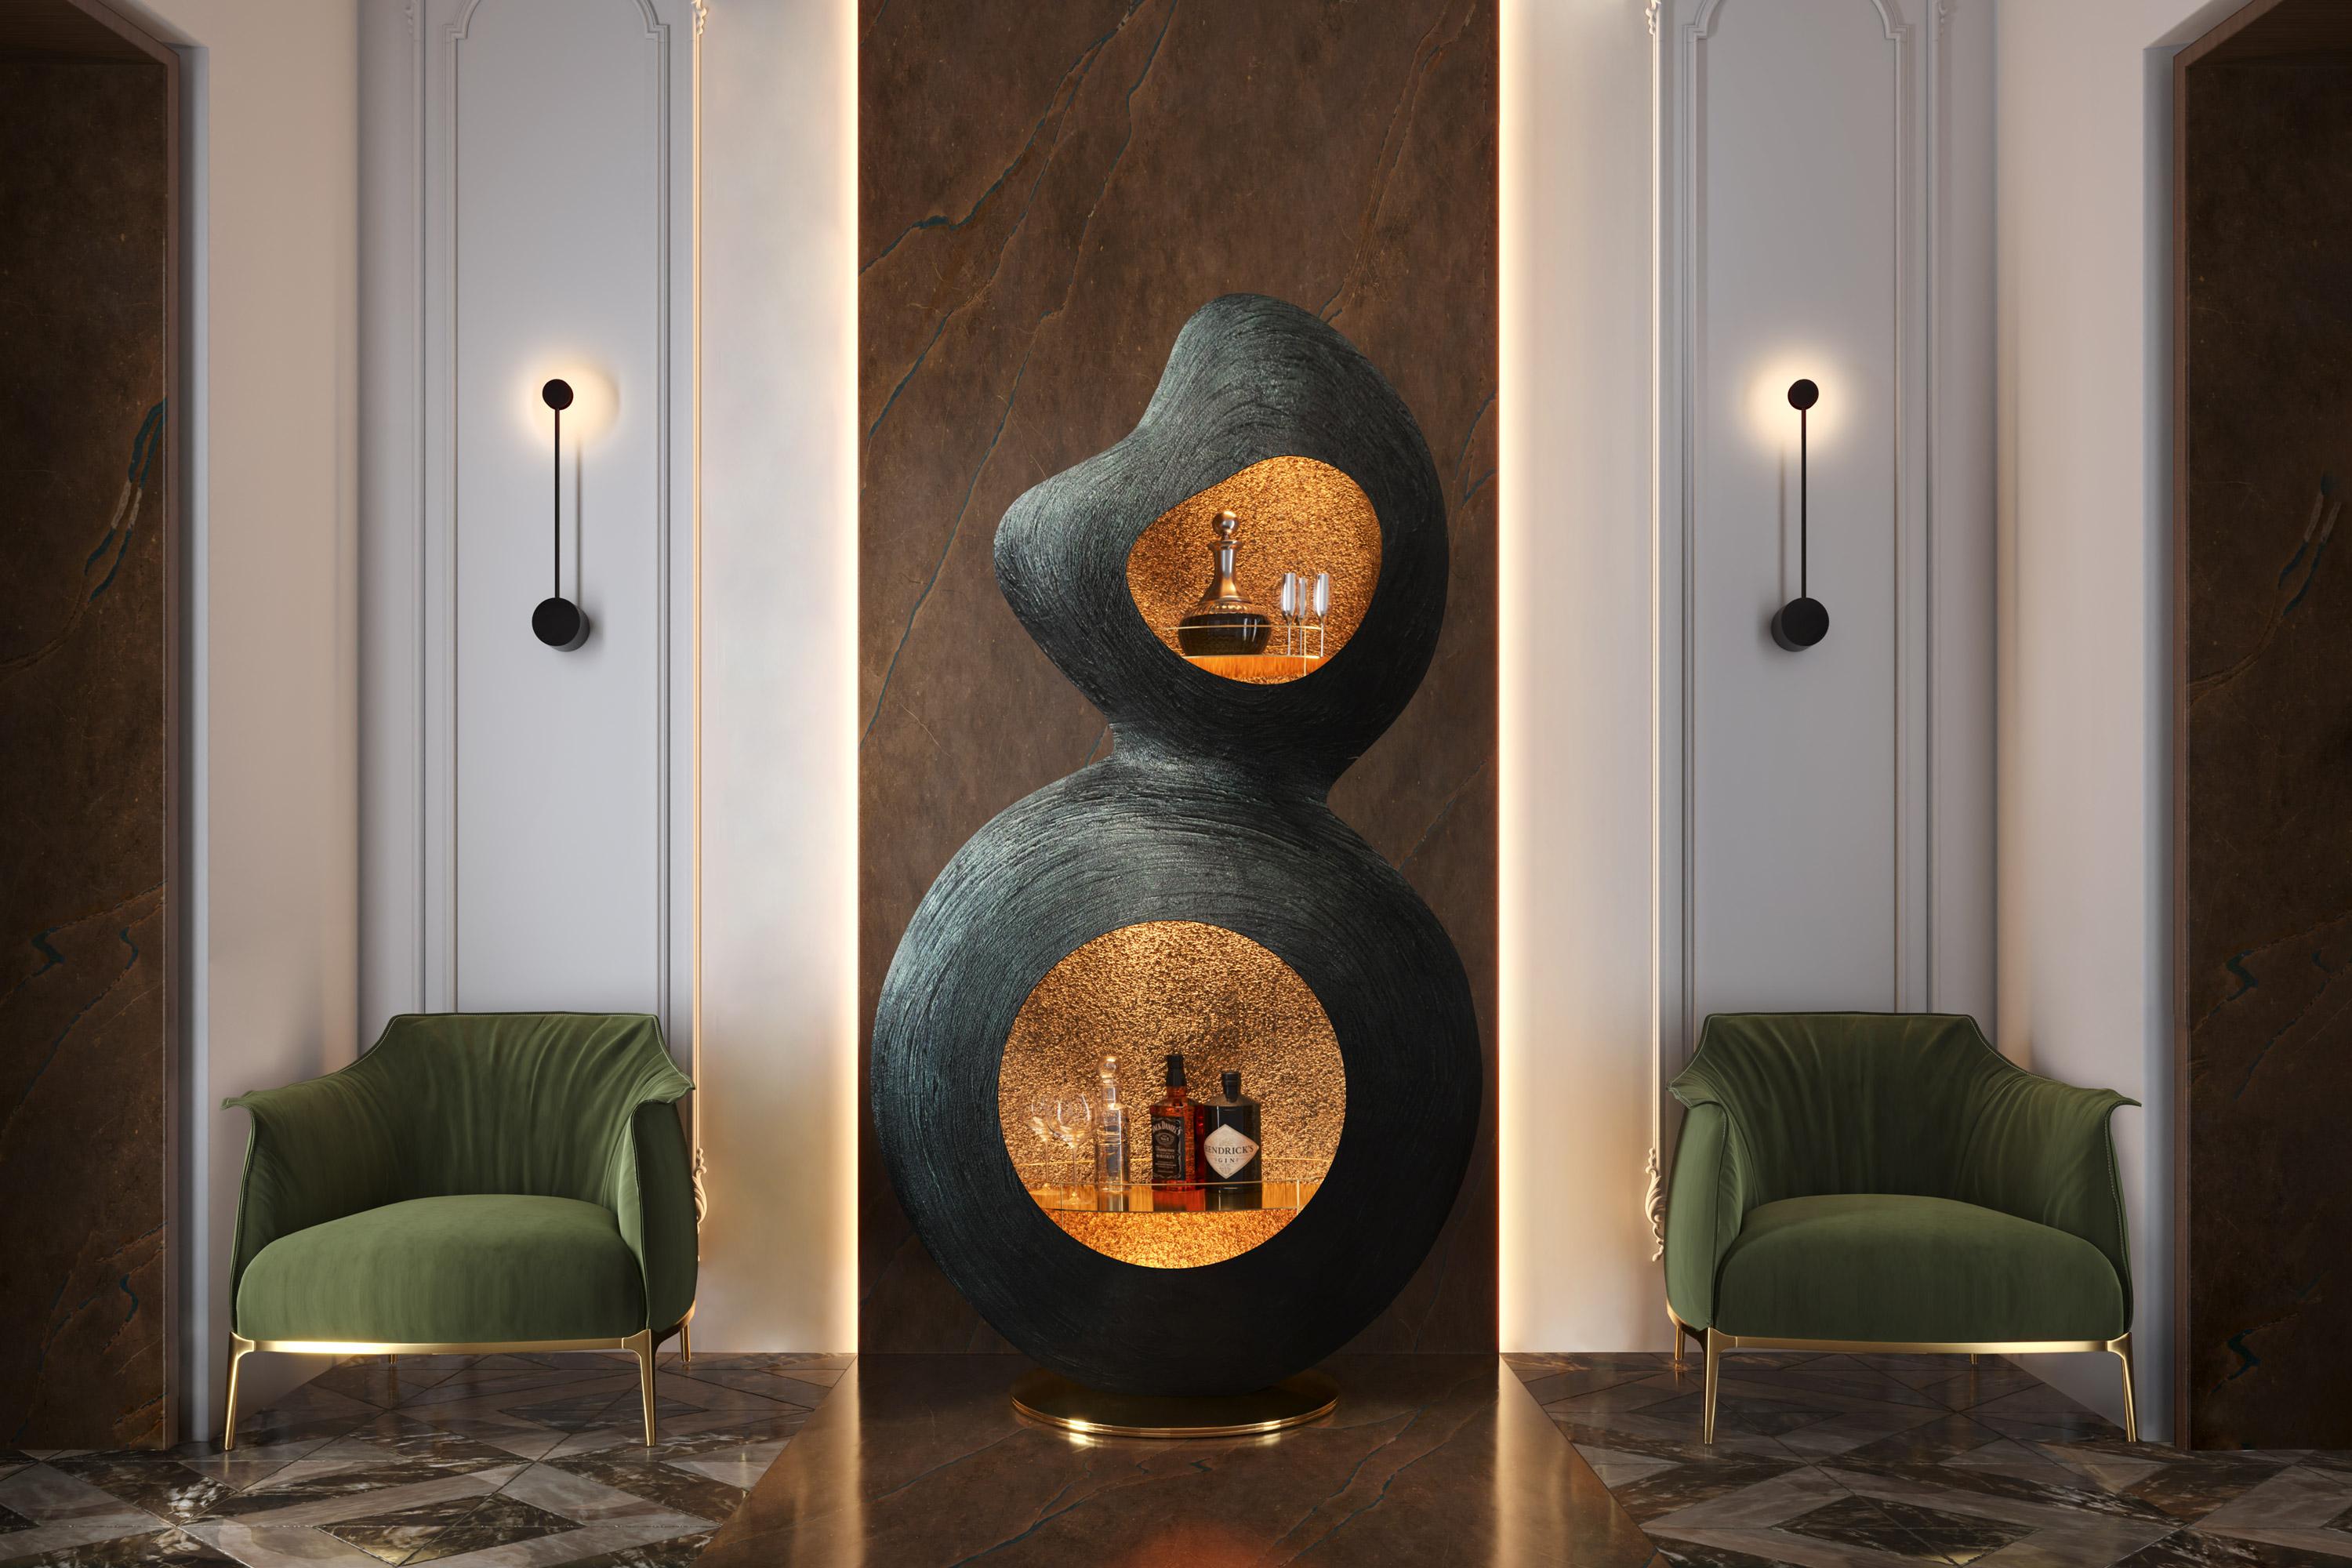 Douro is a signed bar that combines bold finishes, with an amazing sculptural shape. Its made of resin reinforced with fiberglass, with exterior finished in verdigris color on 